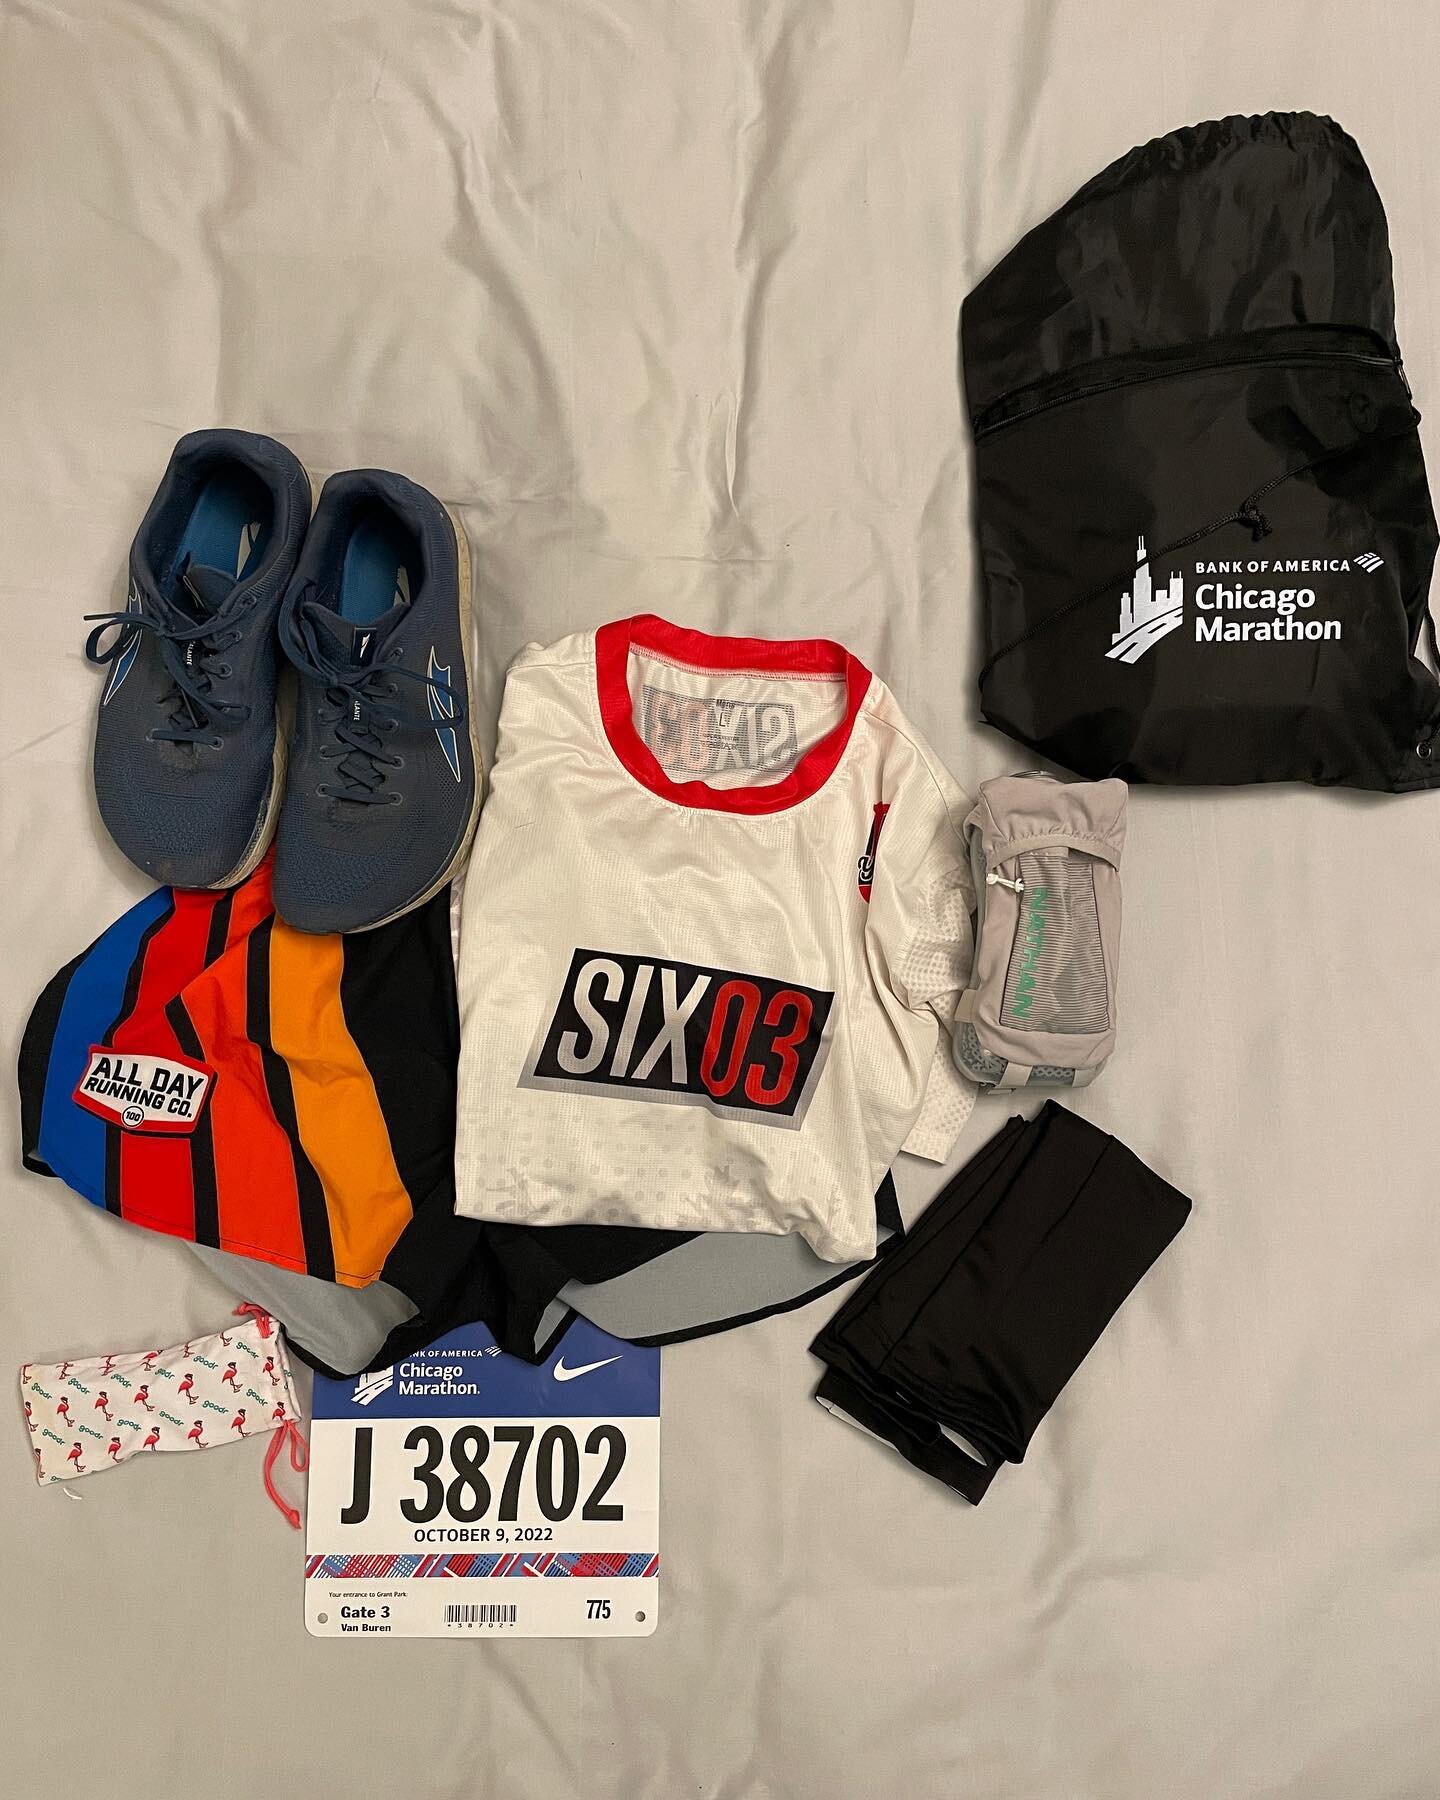 Ready to take on the Chicago marathon tomorrow morning. Undertrained, over fed, wildly optimistic, and ready to have an amazing day! 
🏃🏼
Check out the Chicago marathon website https://www.chicagomarathon.com
To track me (bib 39702). I couldn&rsquo;